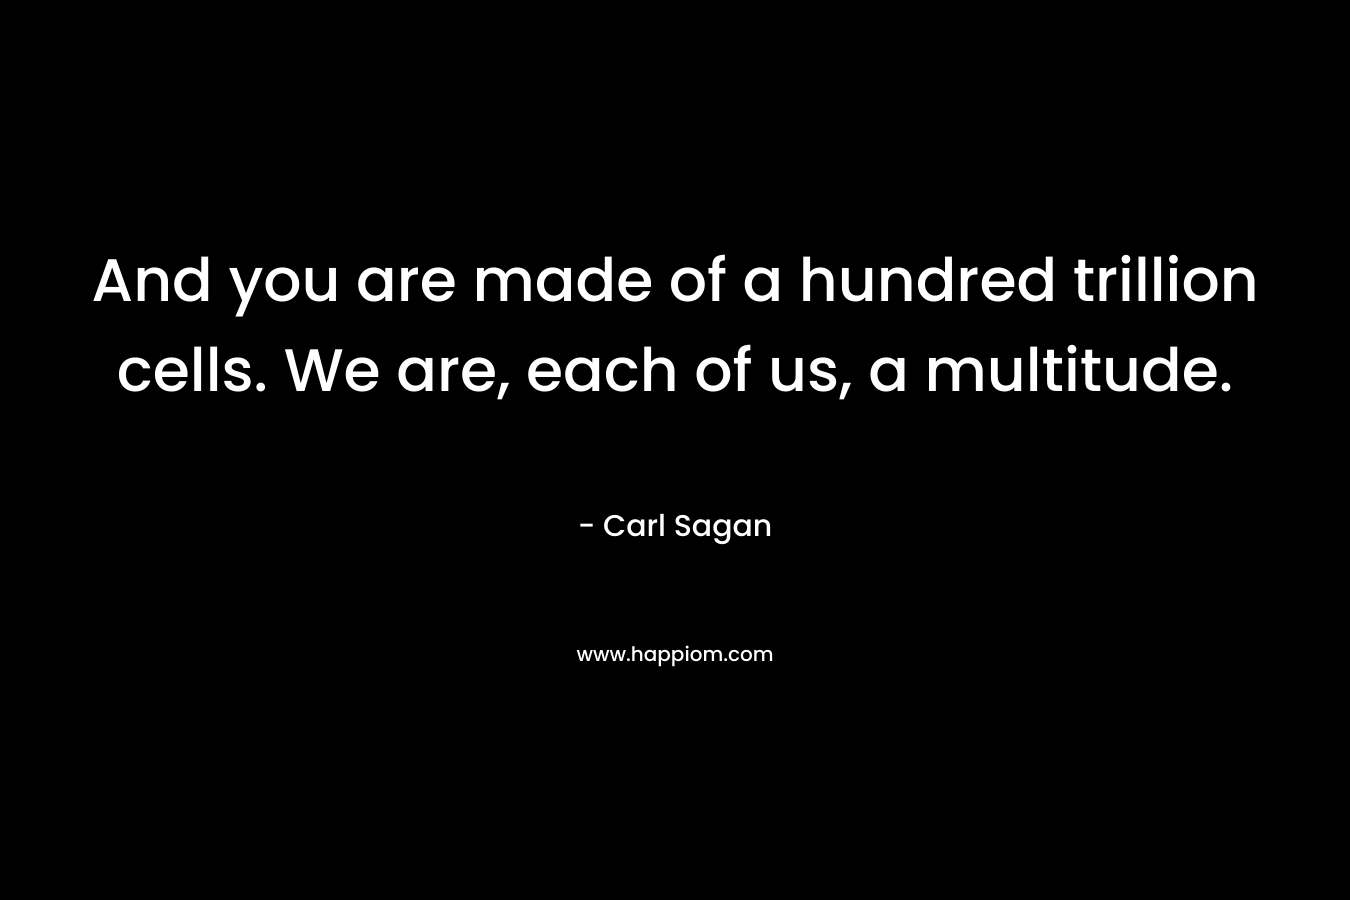 And you are made of a hundred trillion cells. We are, each of us, a multitude.